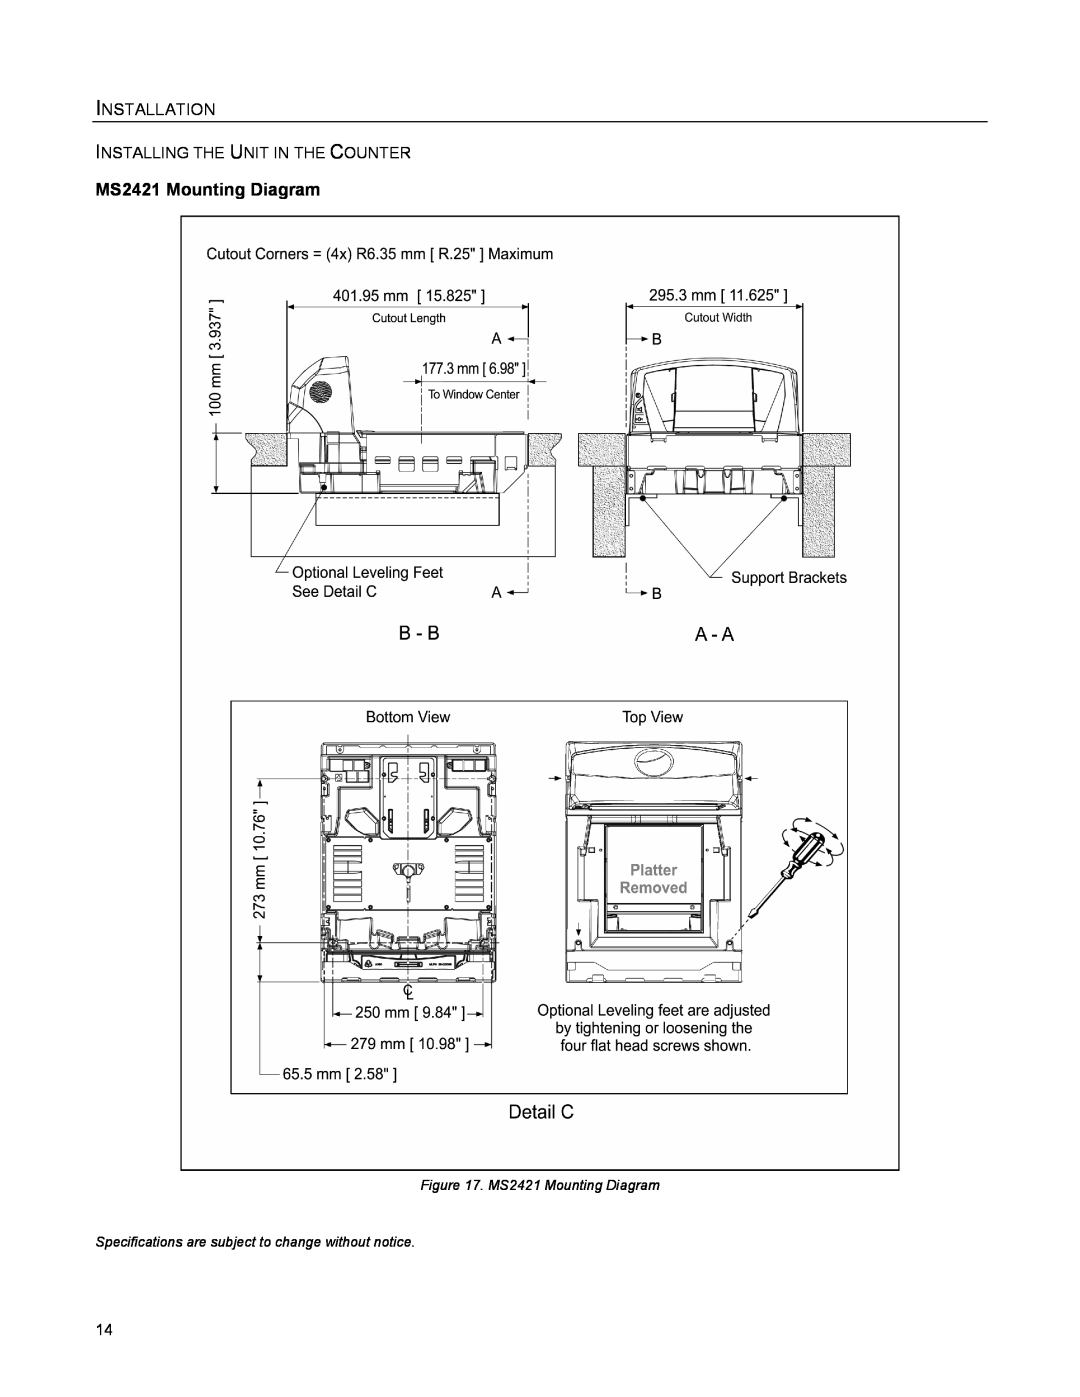 Metrologic Instruments MS2422 manual MS2421 Mounting Diagram, Installation, Installing The Unit In The Counter 